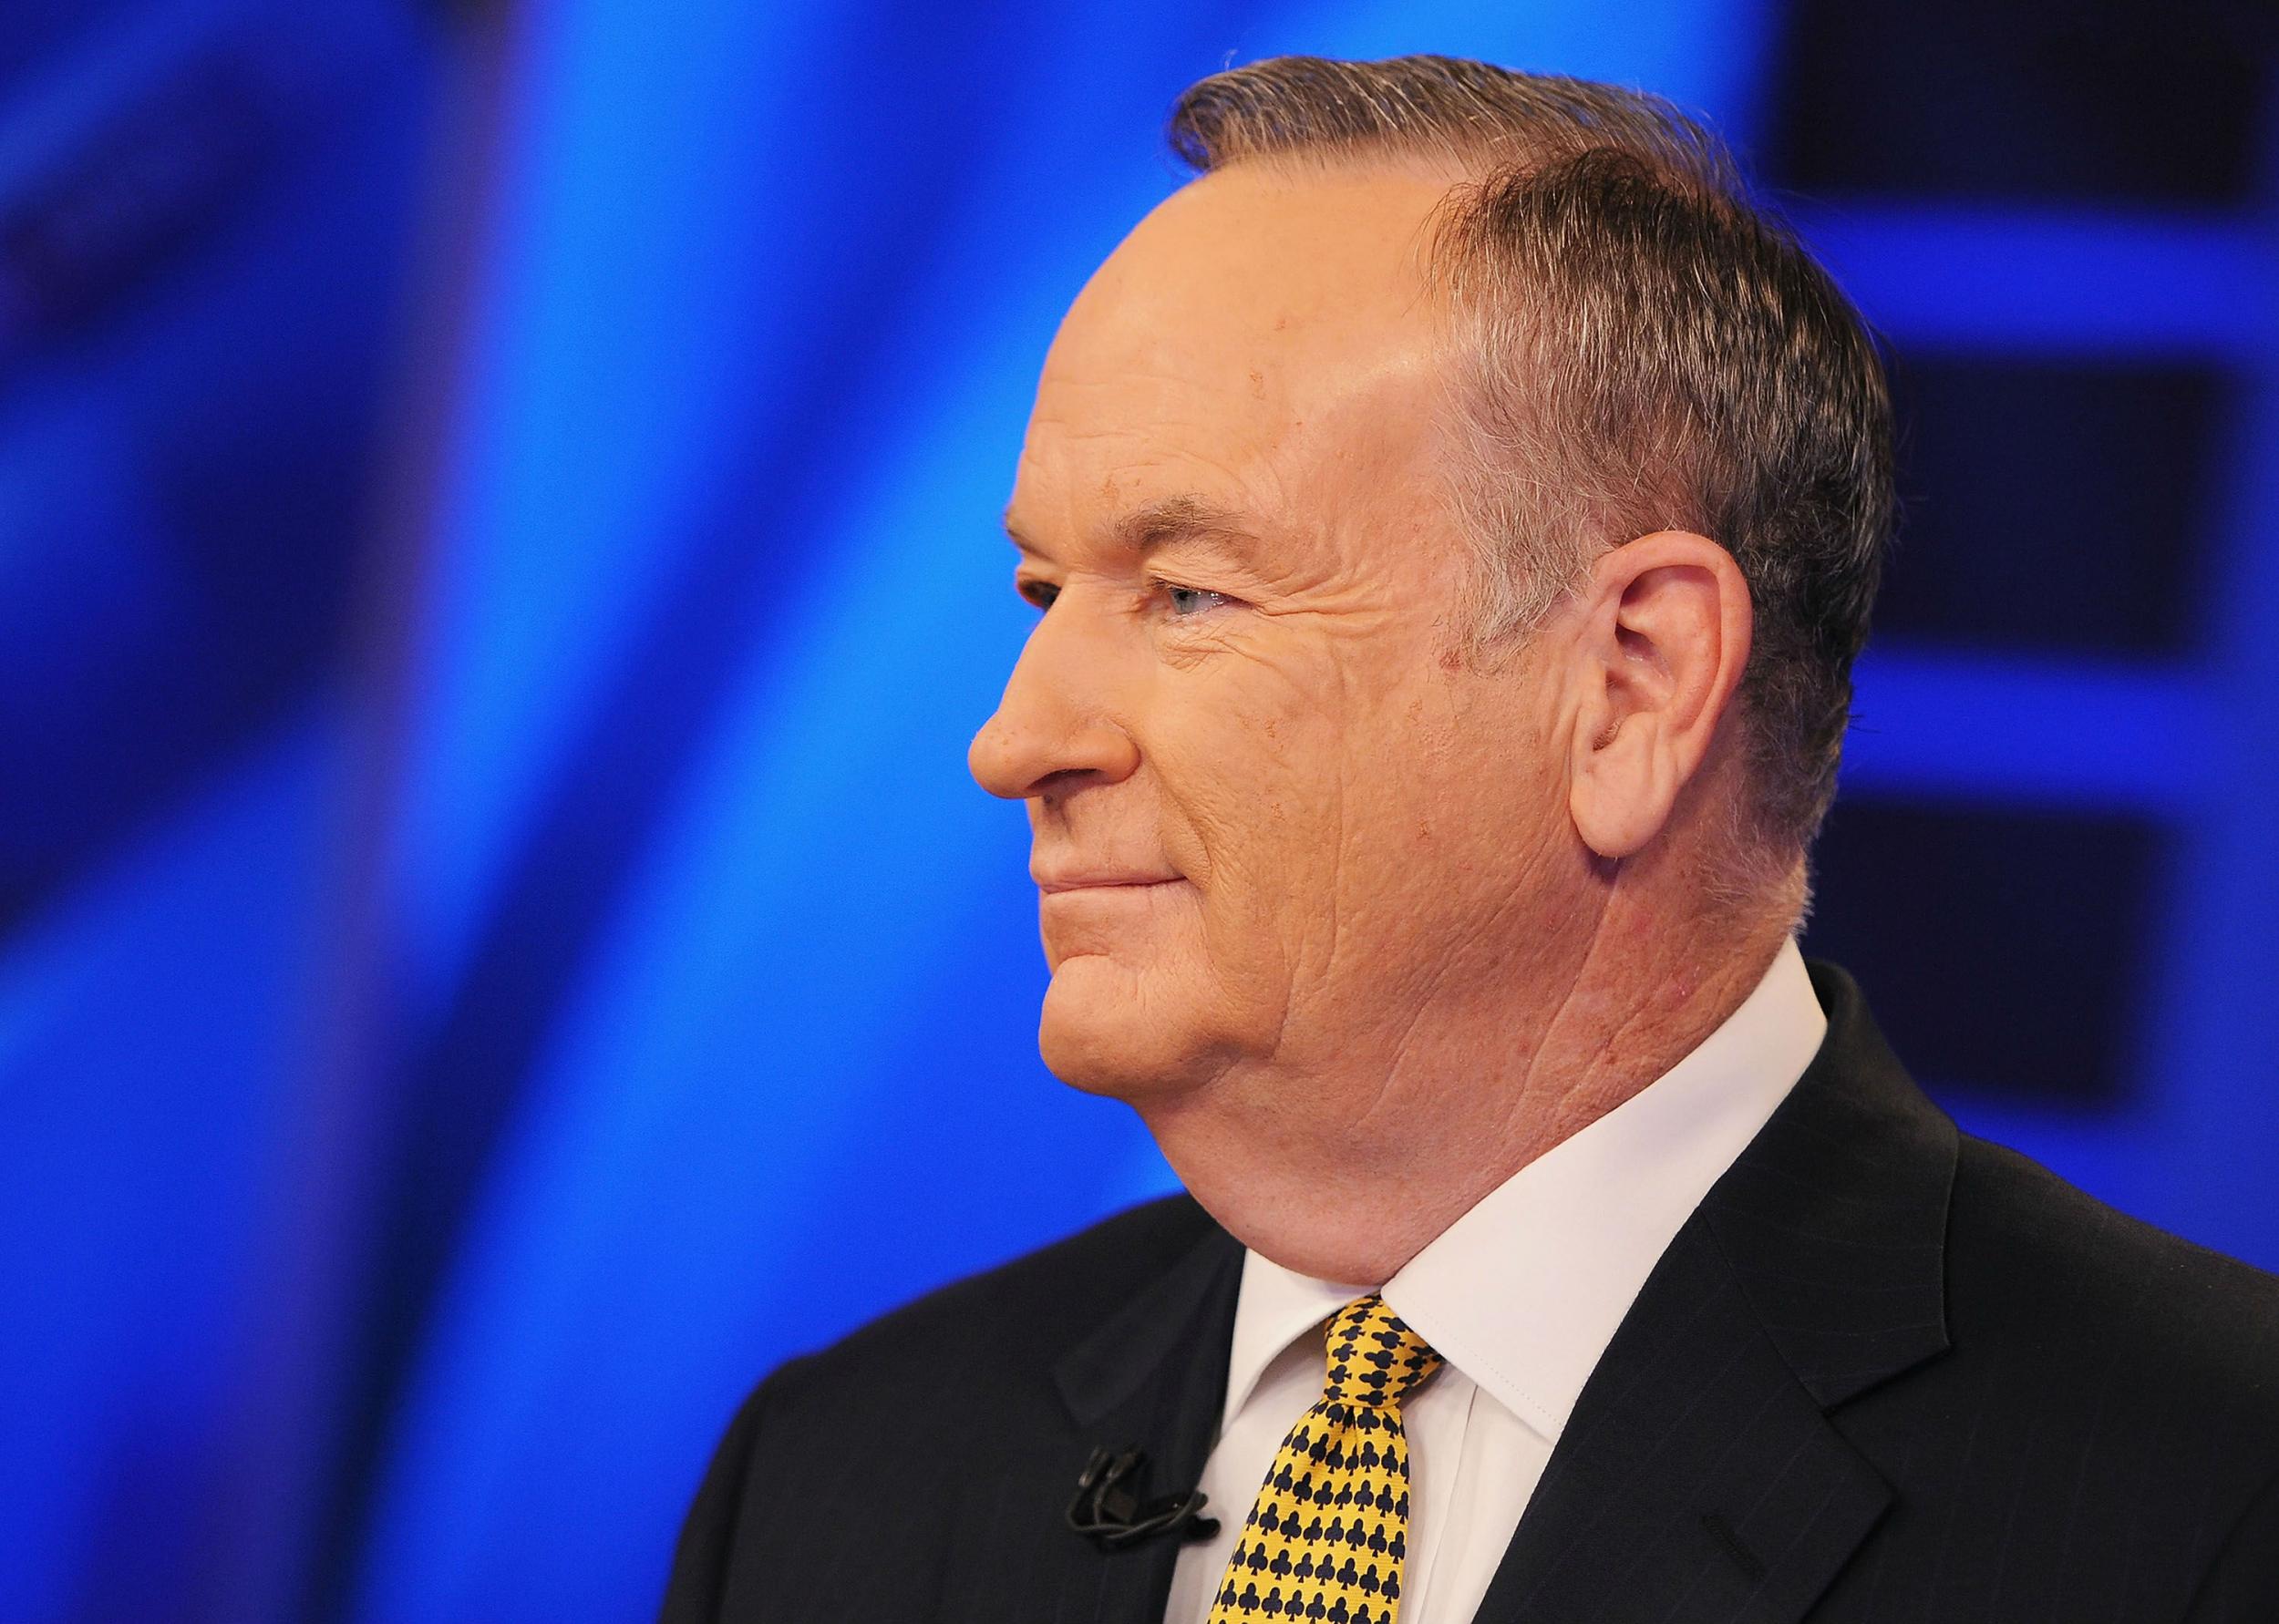 Bill O’Reilly: Fox News host loses custody of his children after